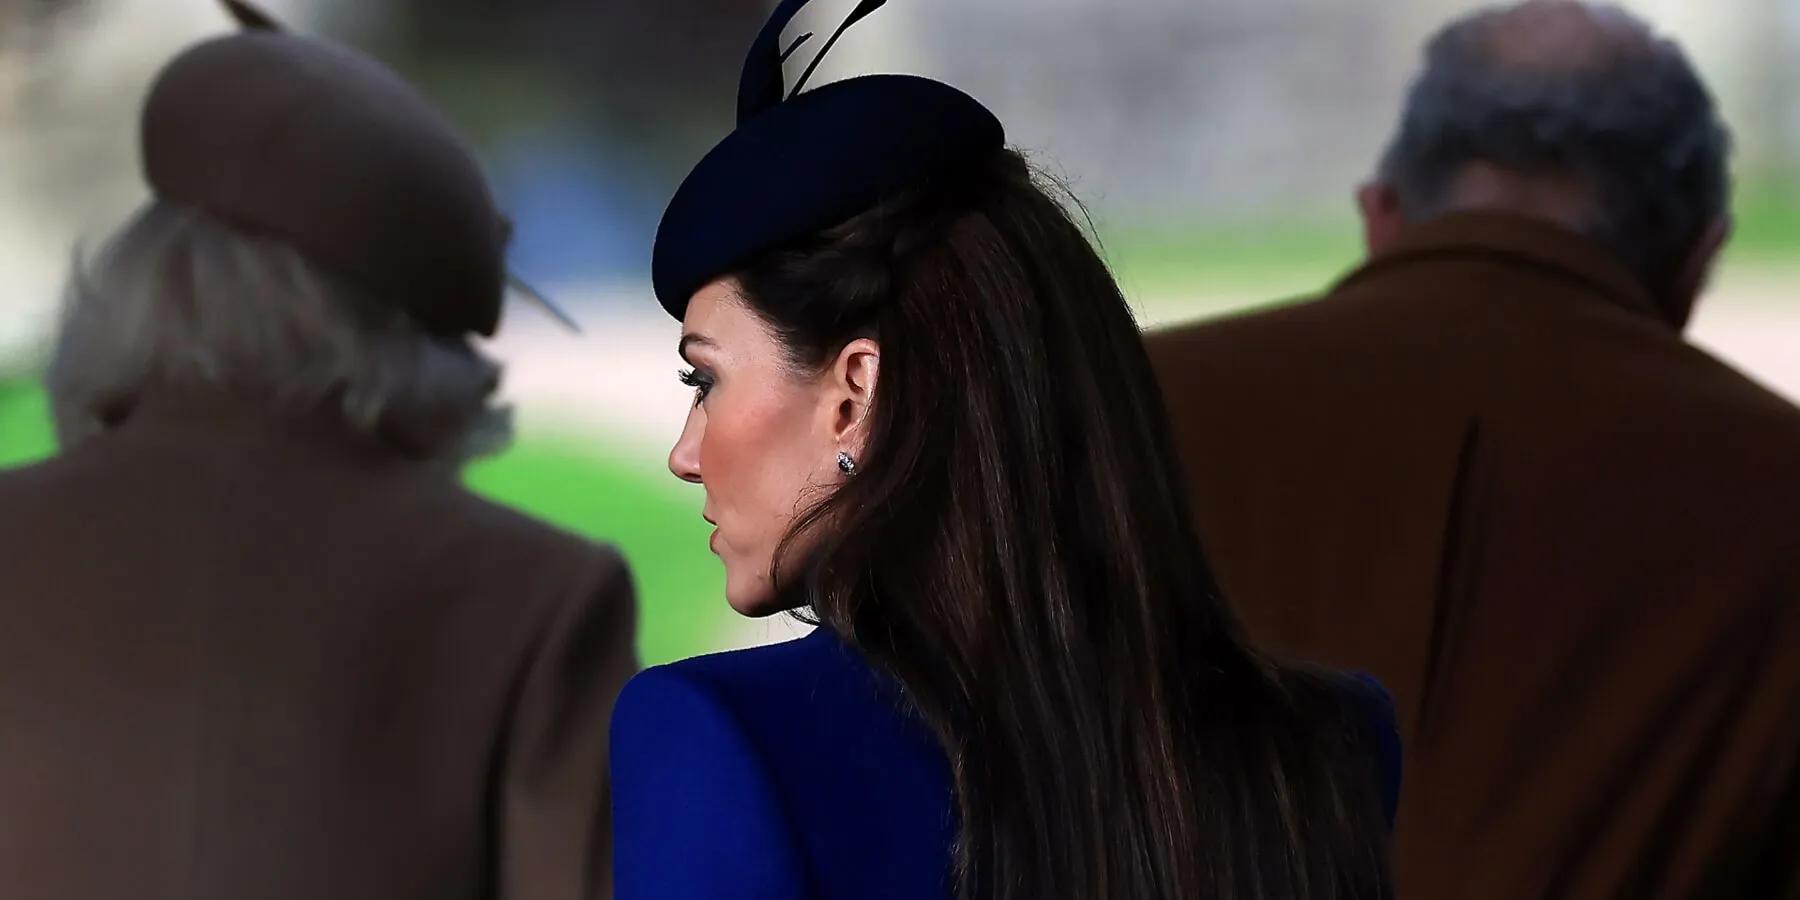 Kate Middleton’s Public Treatment Before Cancer Reveal Was ‘Morally Wrong’: She’s Not ‘Public Property,’ Says Author [Video]